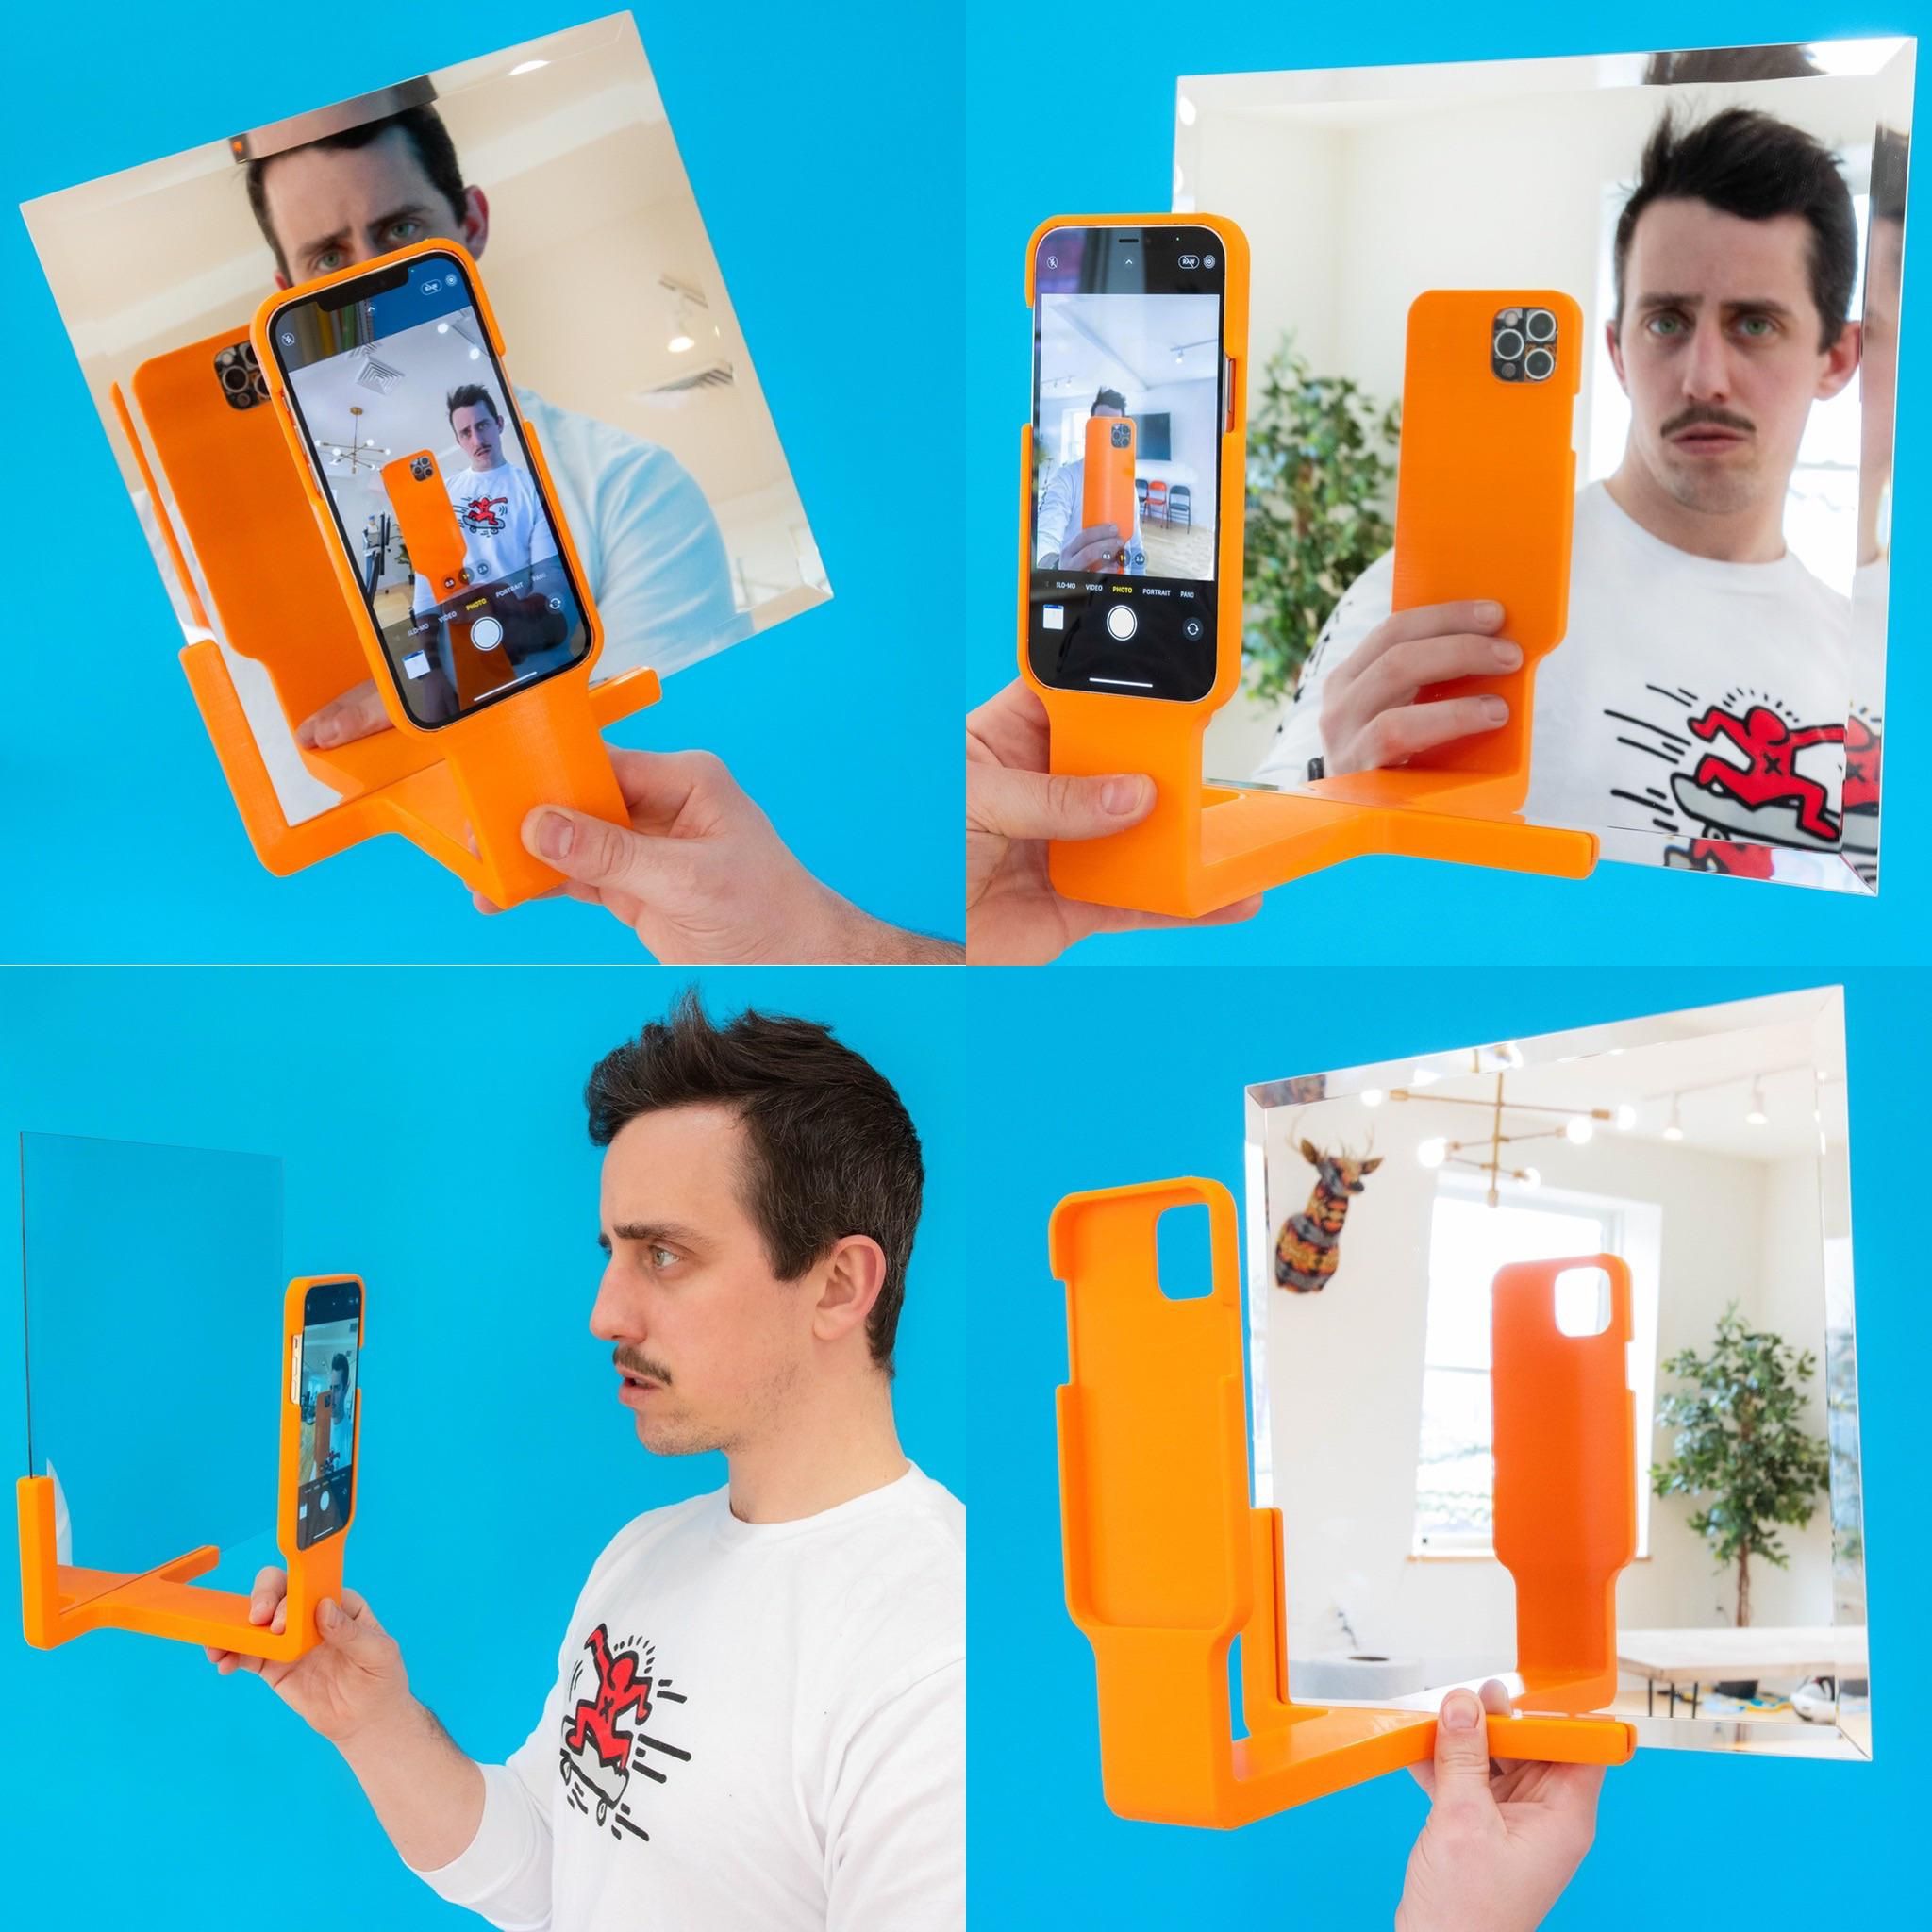 I design unnecessary products so I created a phone case that lets you take a mirror selfie absolutely anywhere.